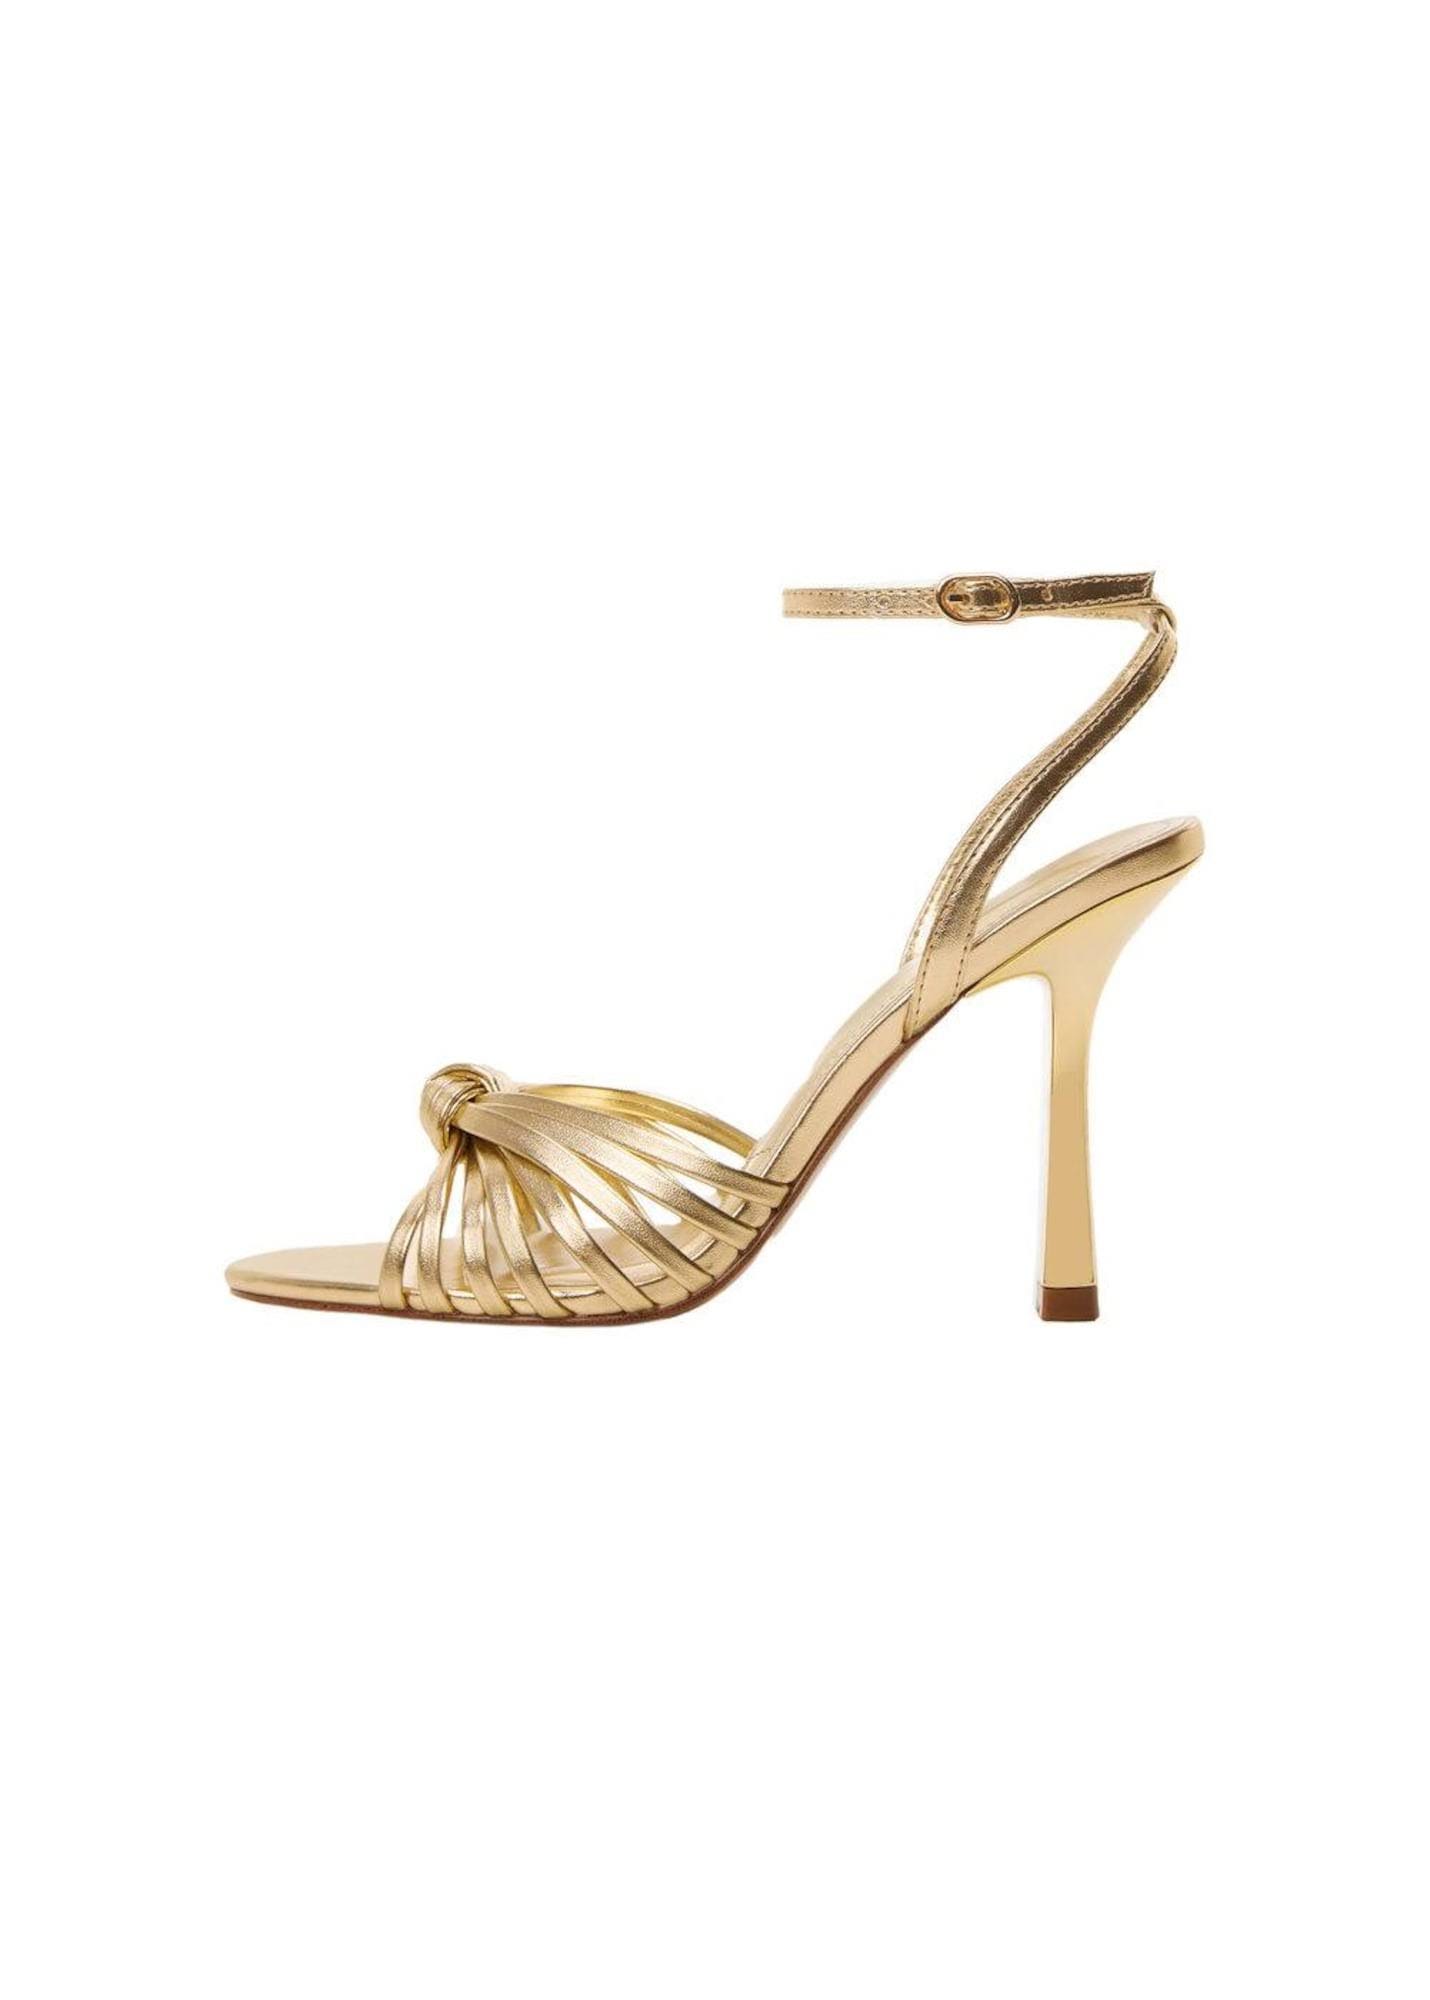 Golden Strappy Heels by Mango for Stylish Footwear Addition | Image